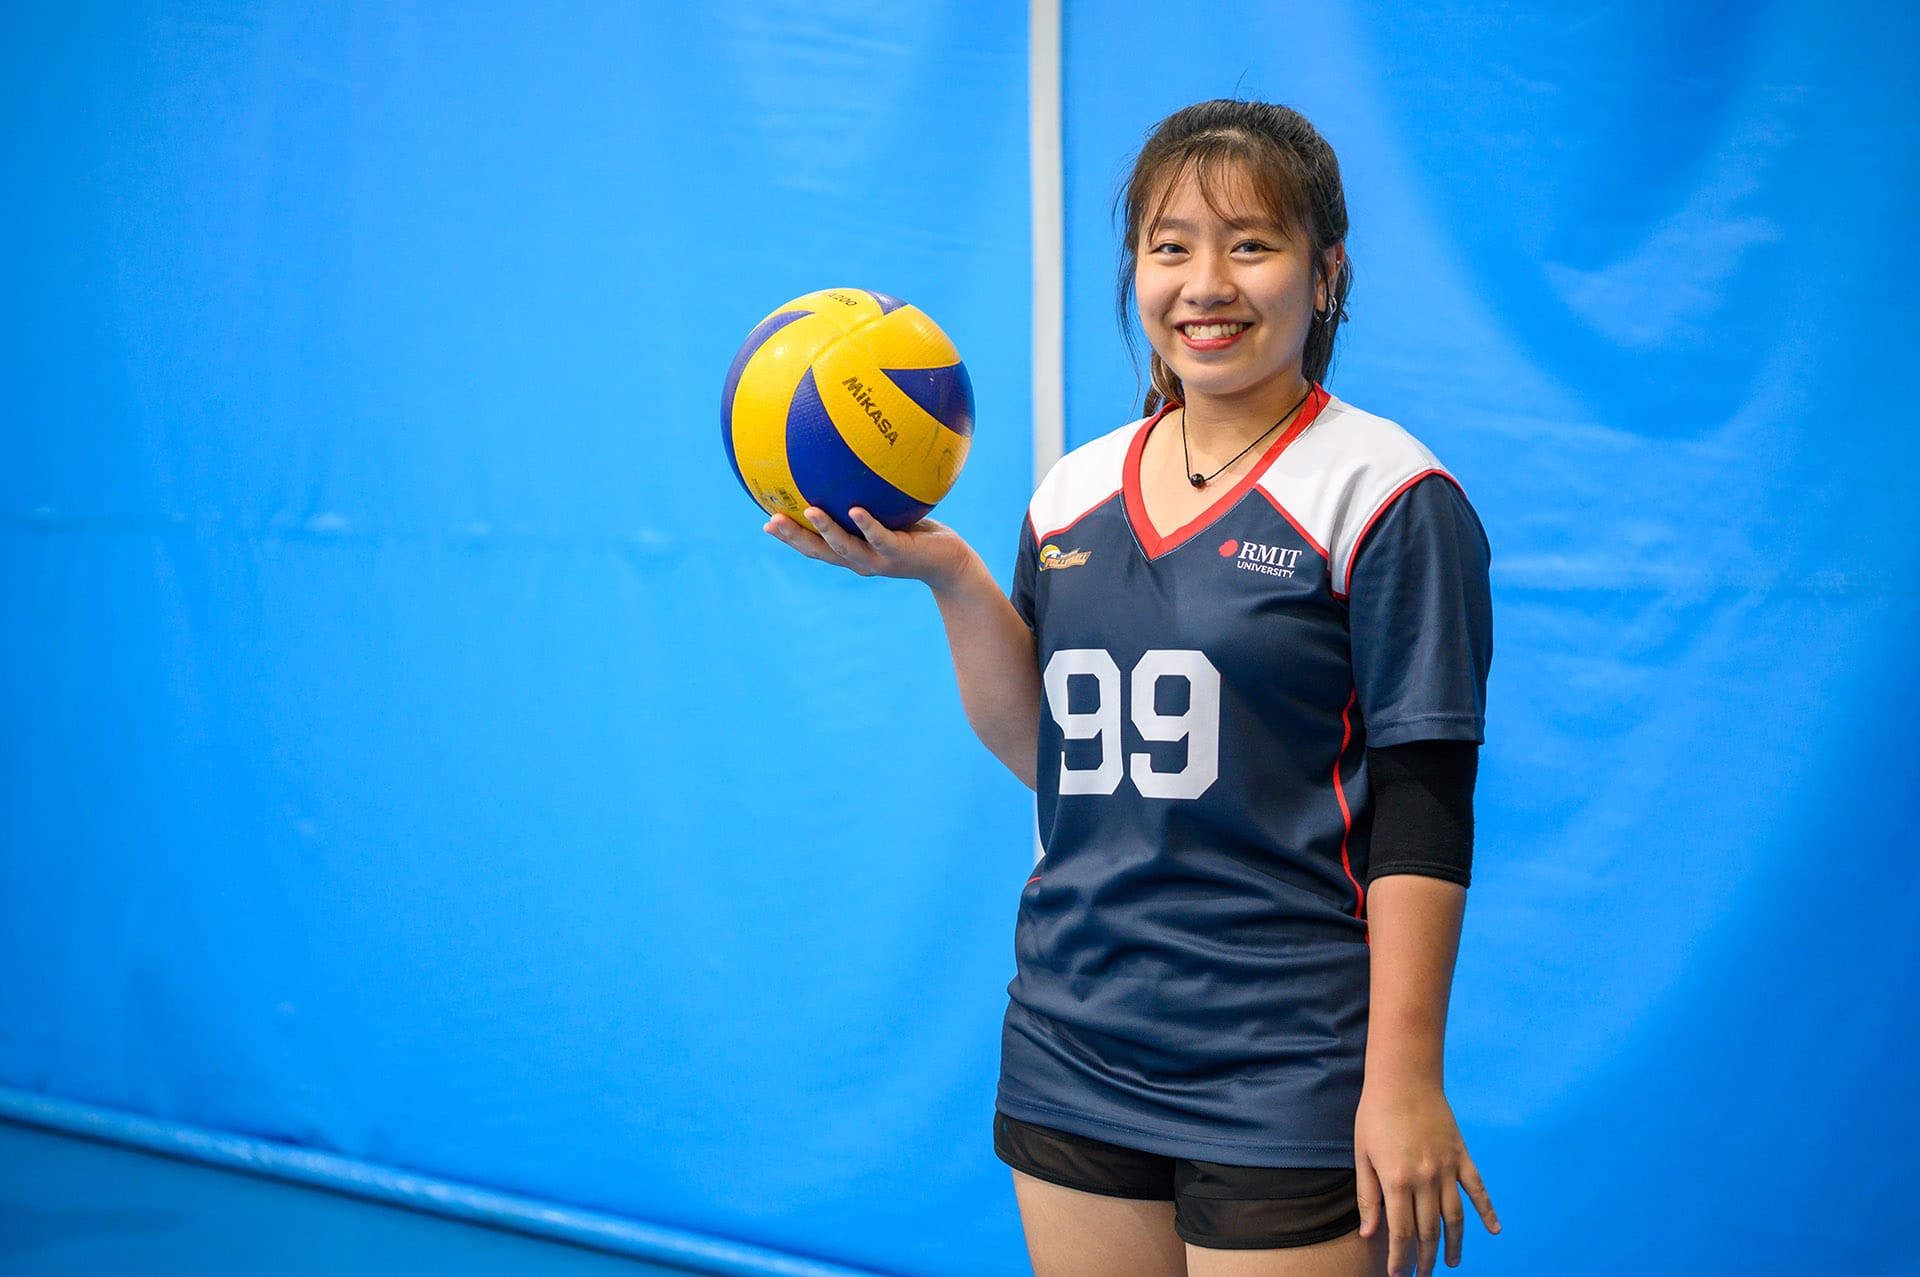 SGS volleyball player holding a volleyball.